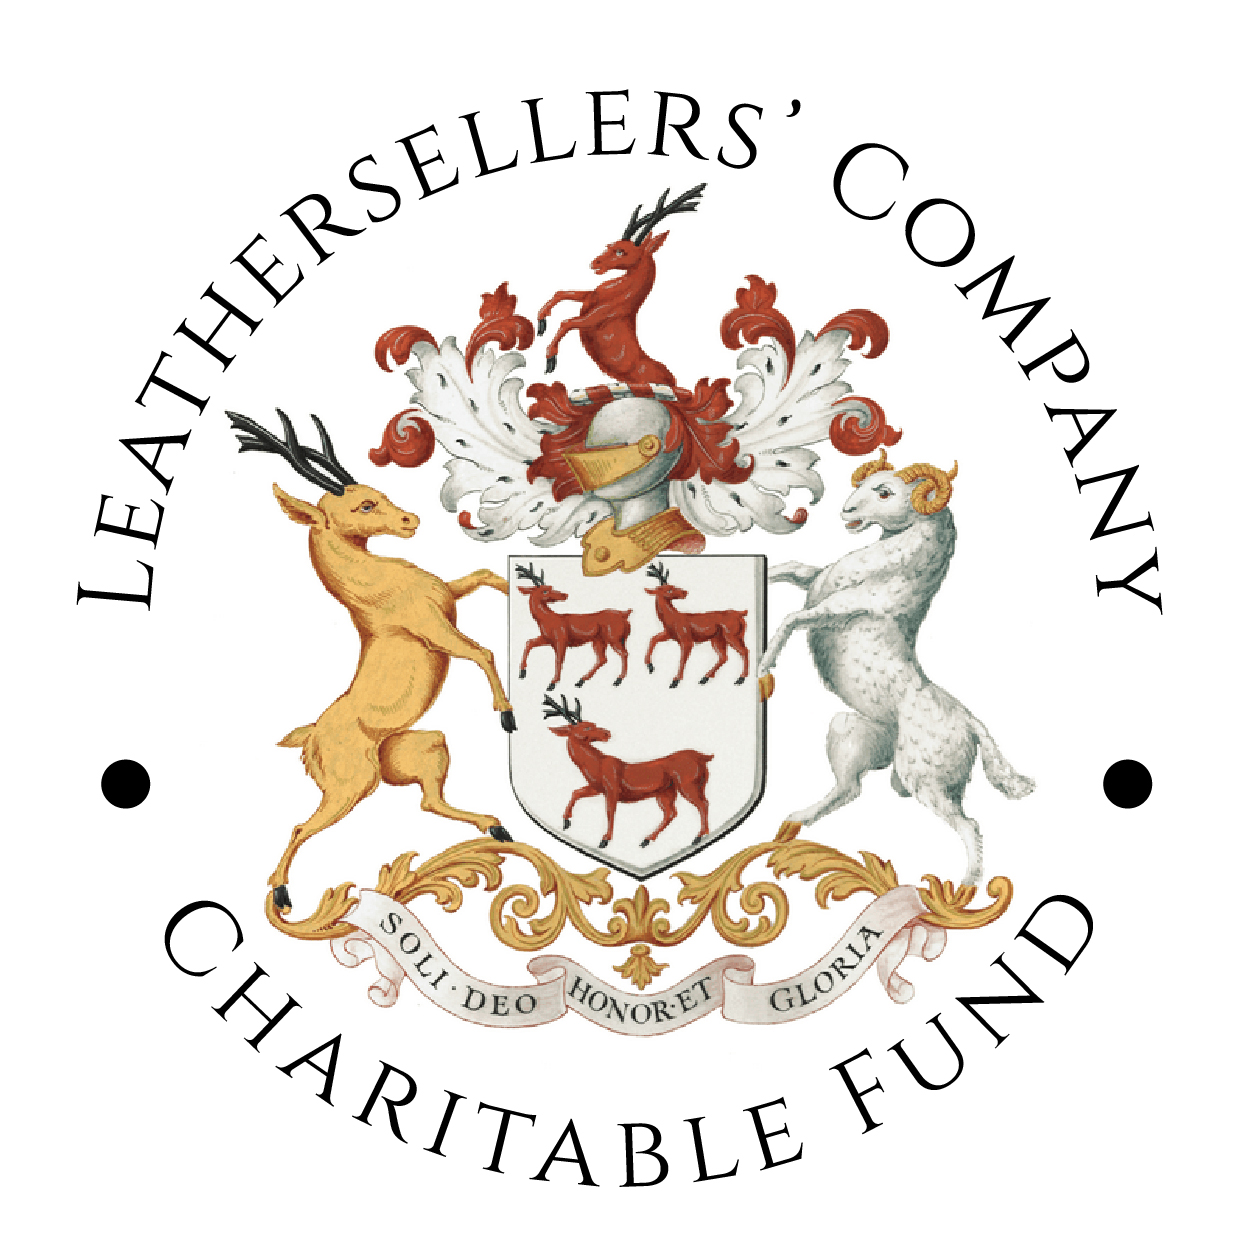 The Leathersellers' Company Charitable Fund